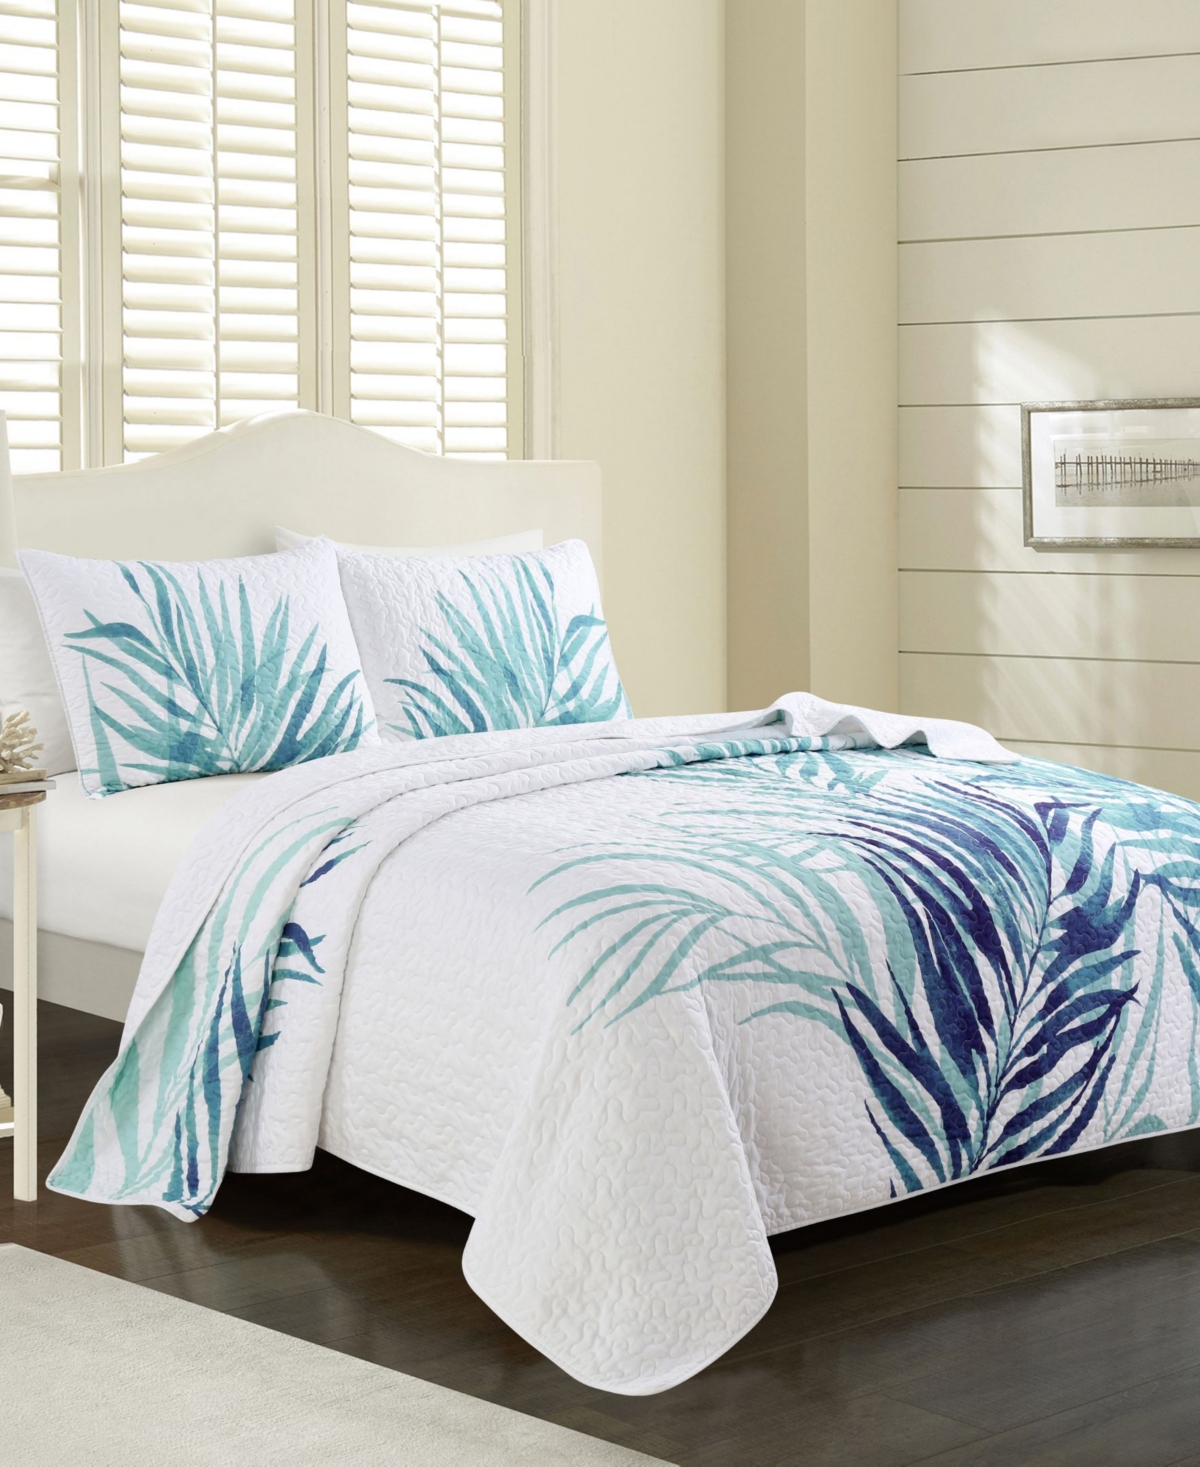 Elise And James Home Palm Leaf Tropical Jungle 3-piece Quilt Set, Queen In Teal